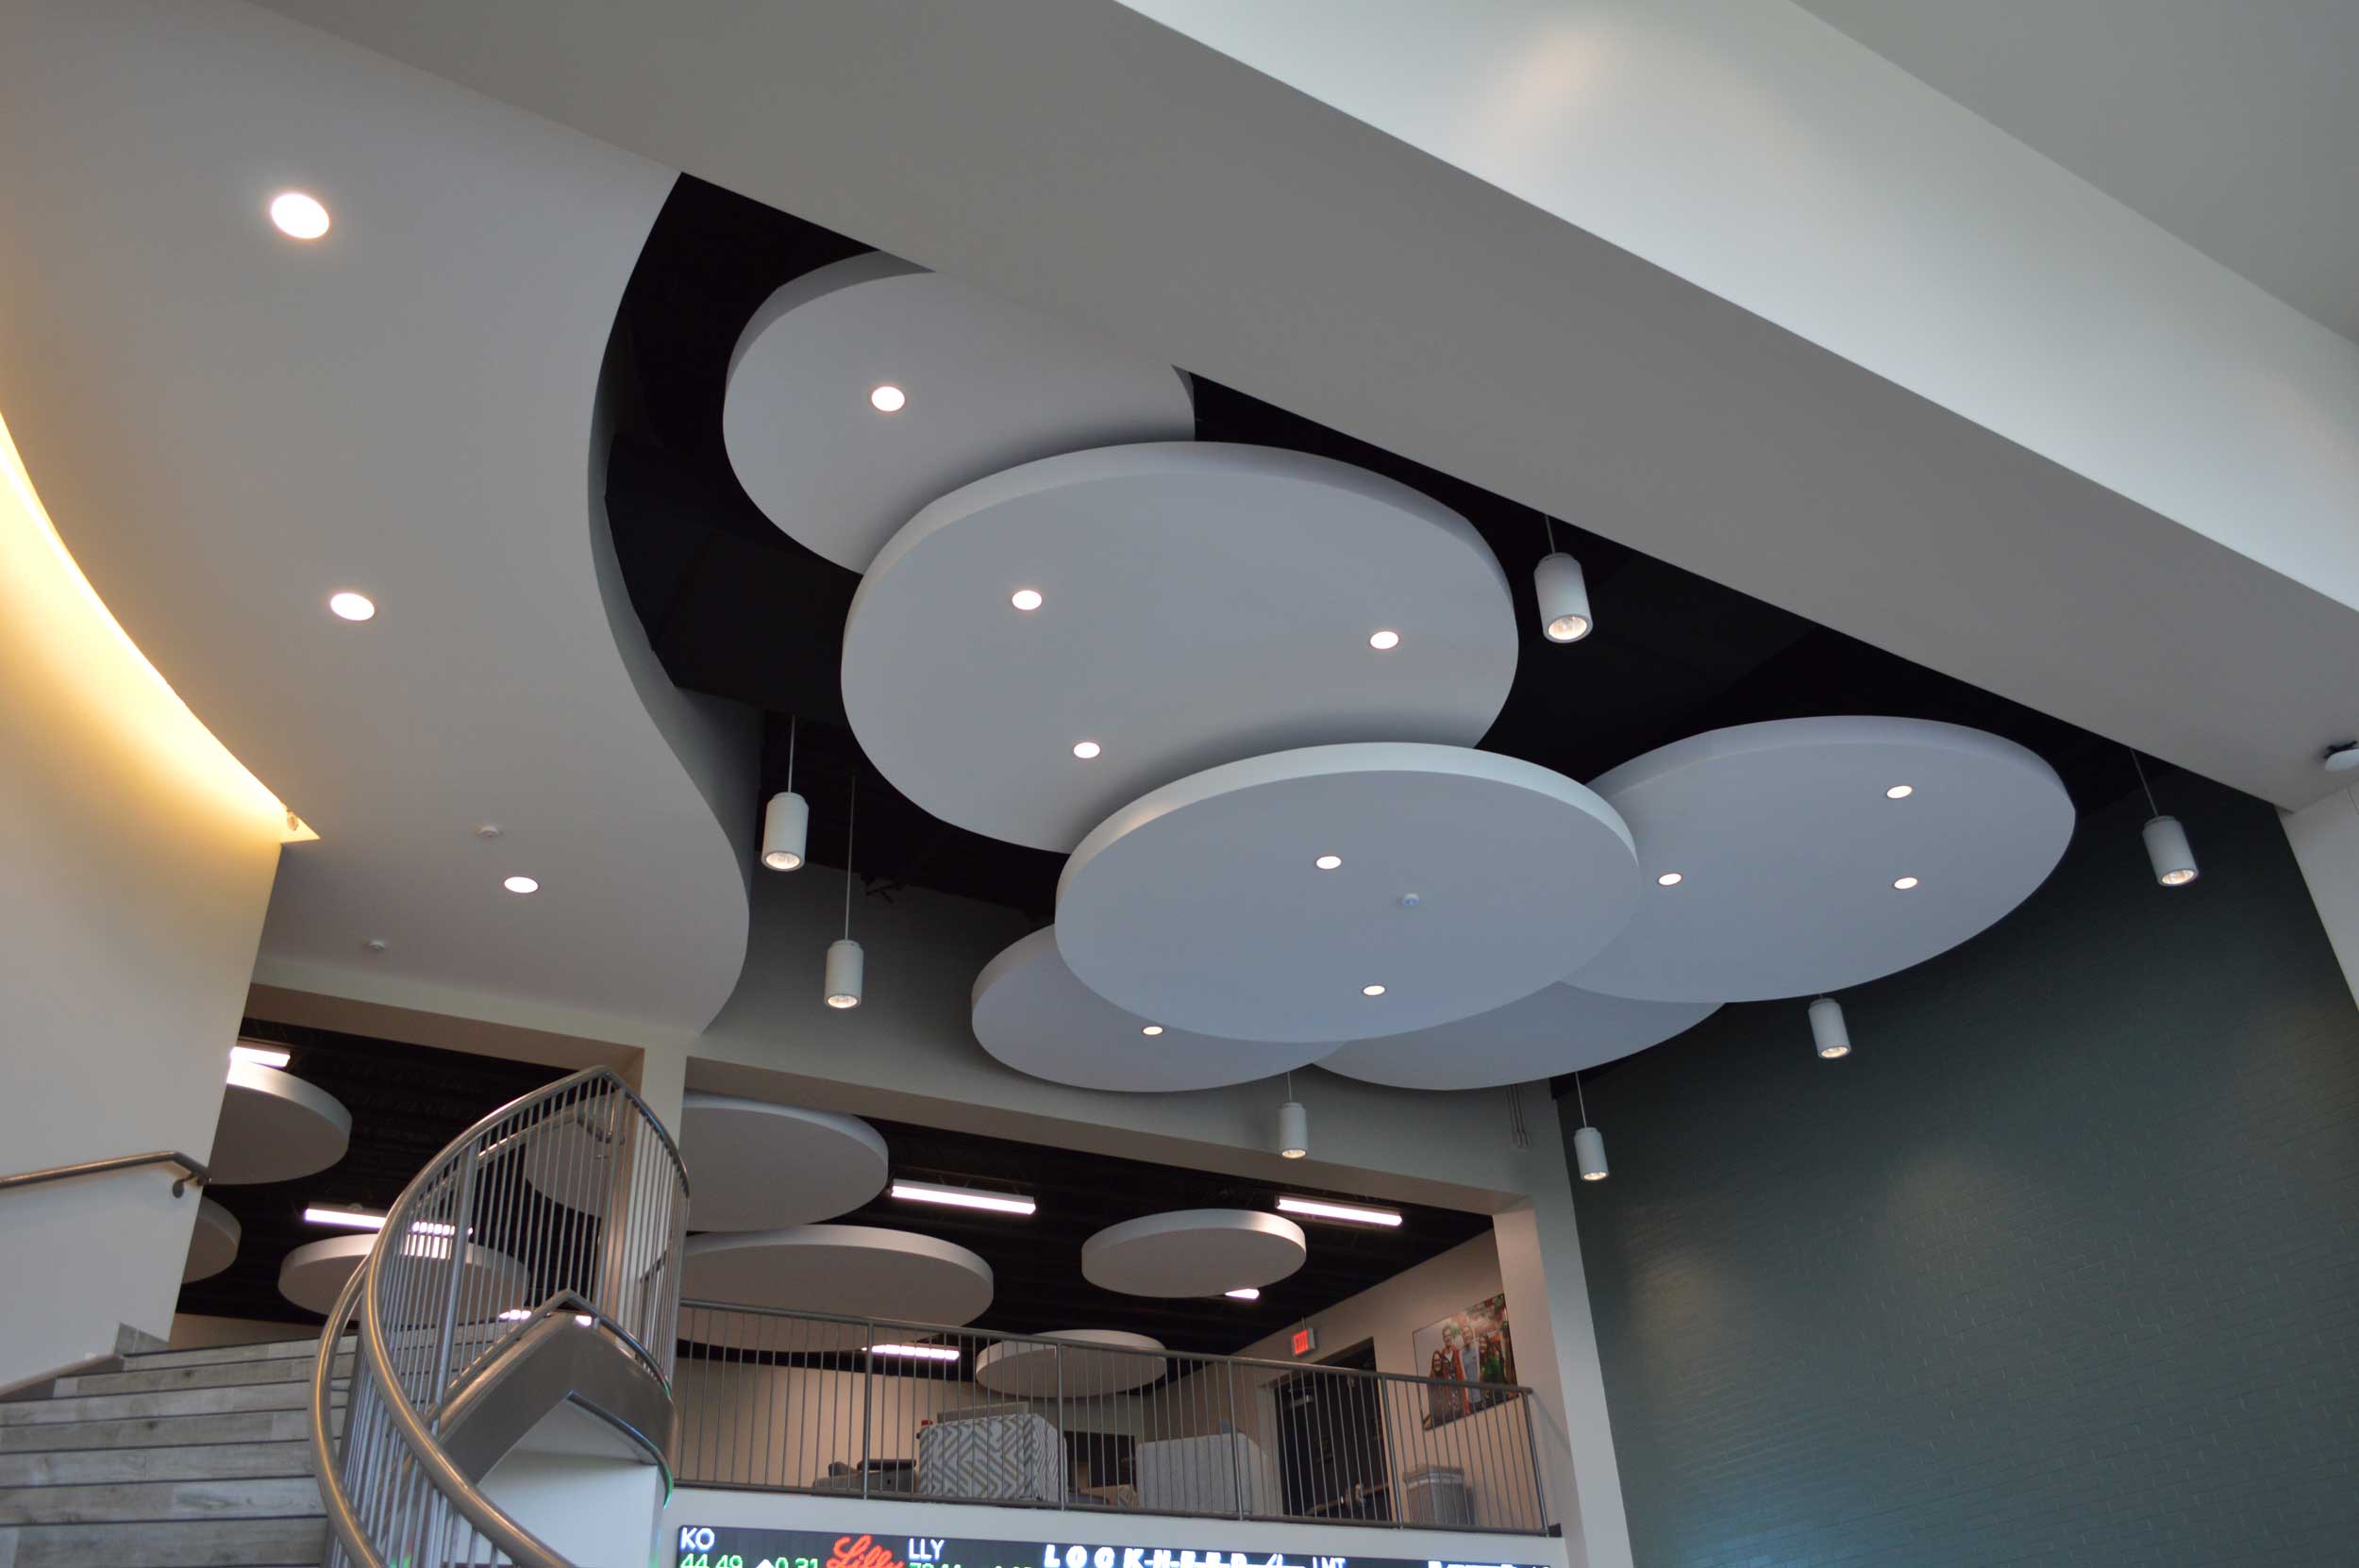 multi tiered light installation on the ceiling